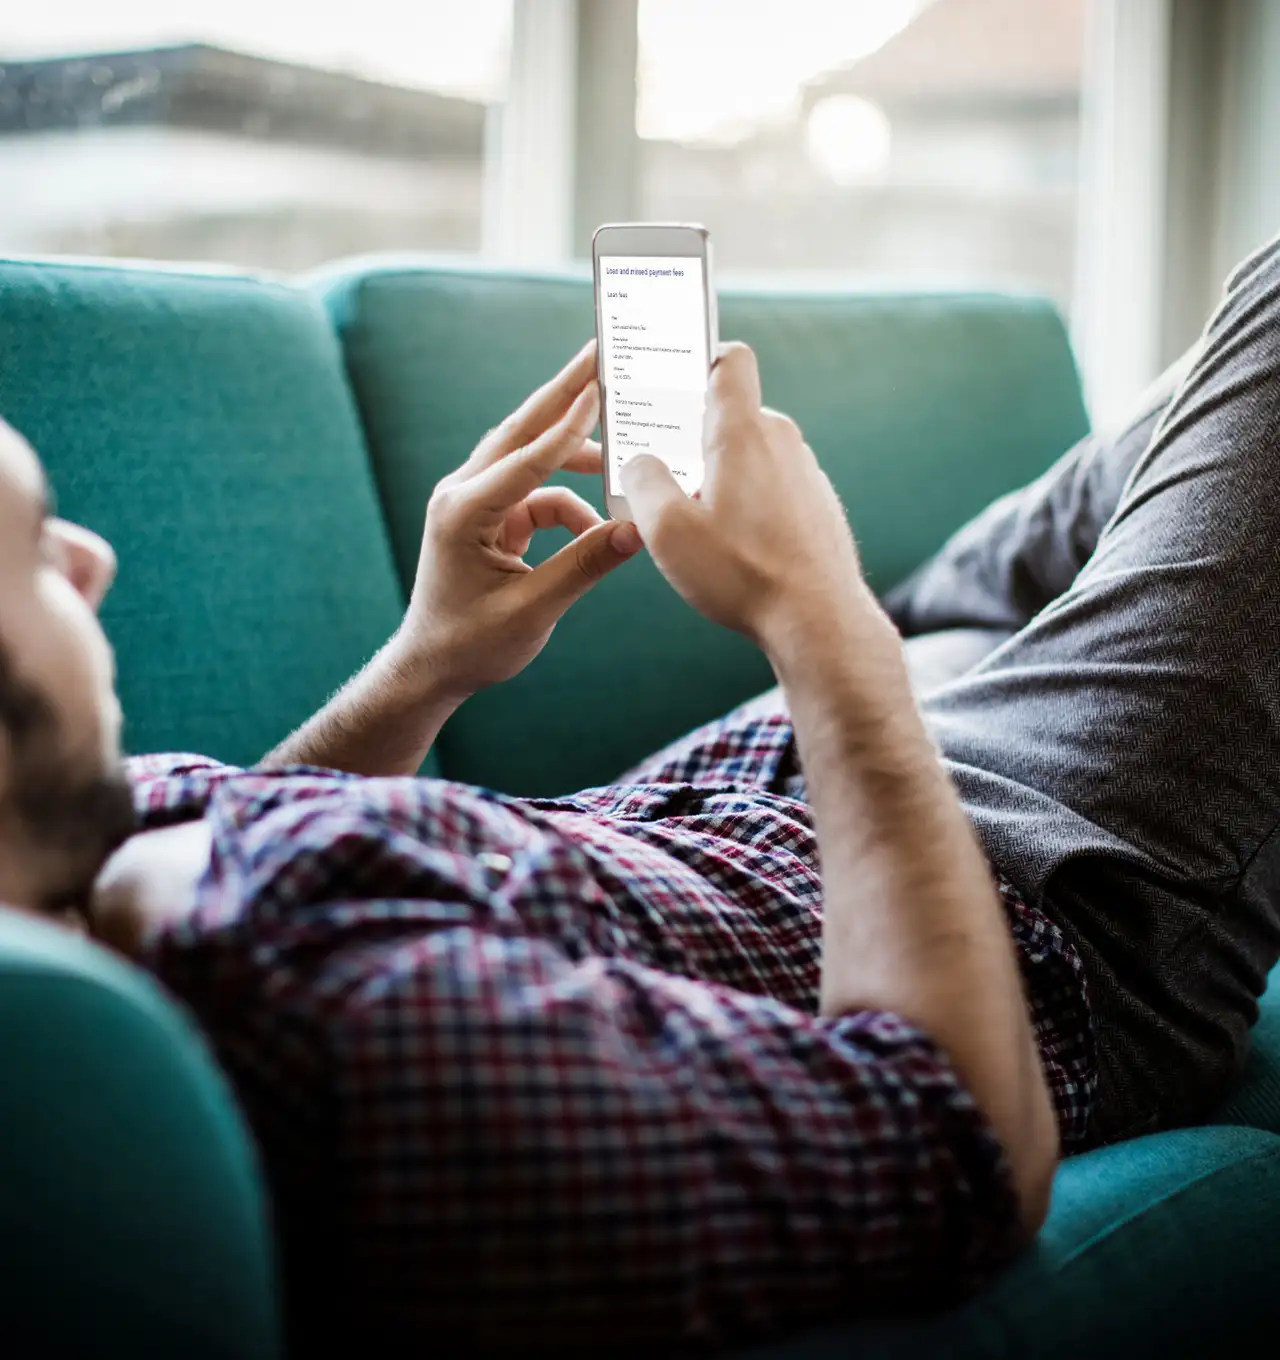 Man relaxing on couch while looking at our website on his phone